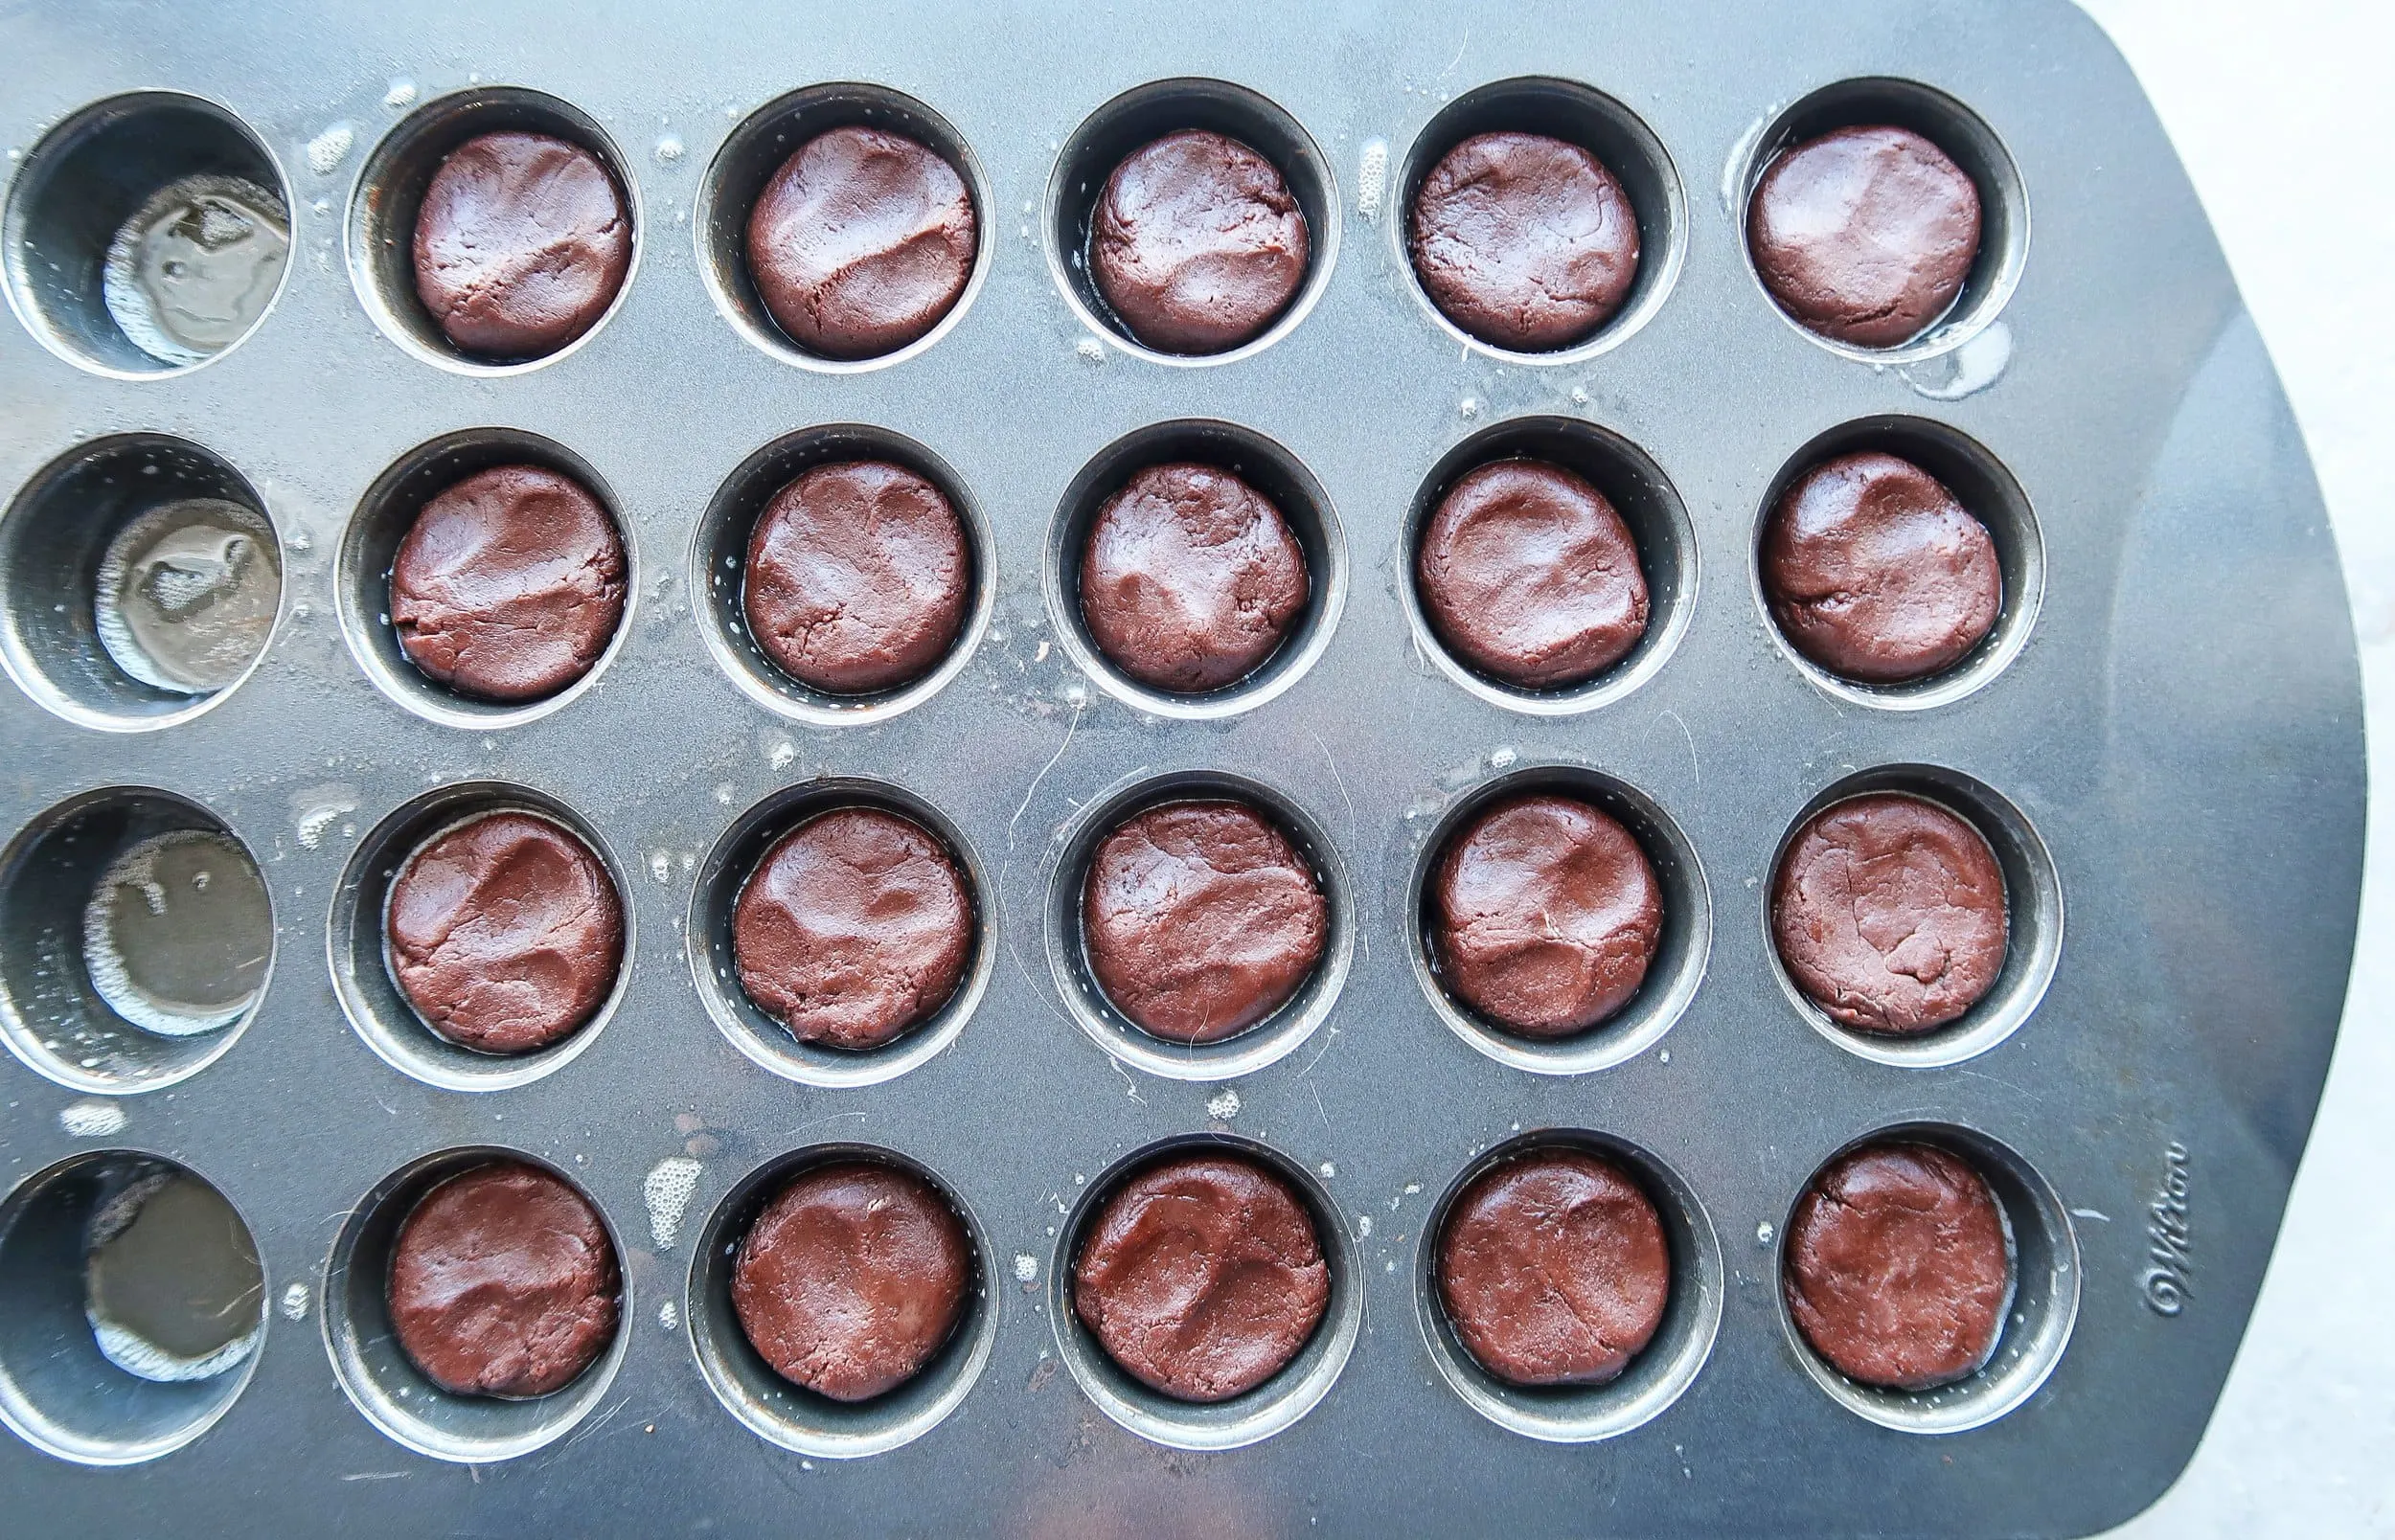 Cookie dough pressed into a muffin pan.